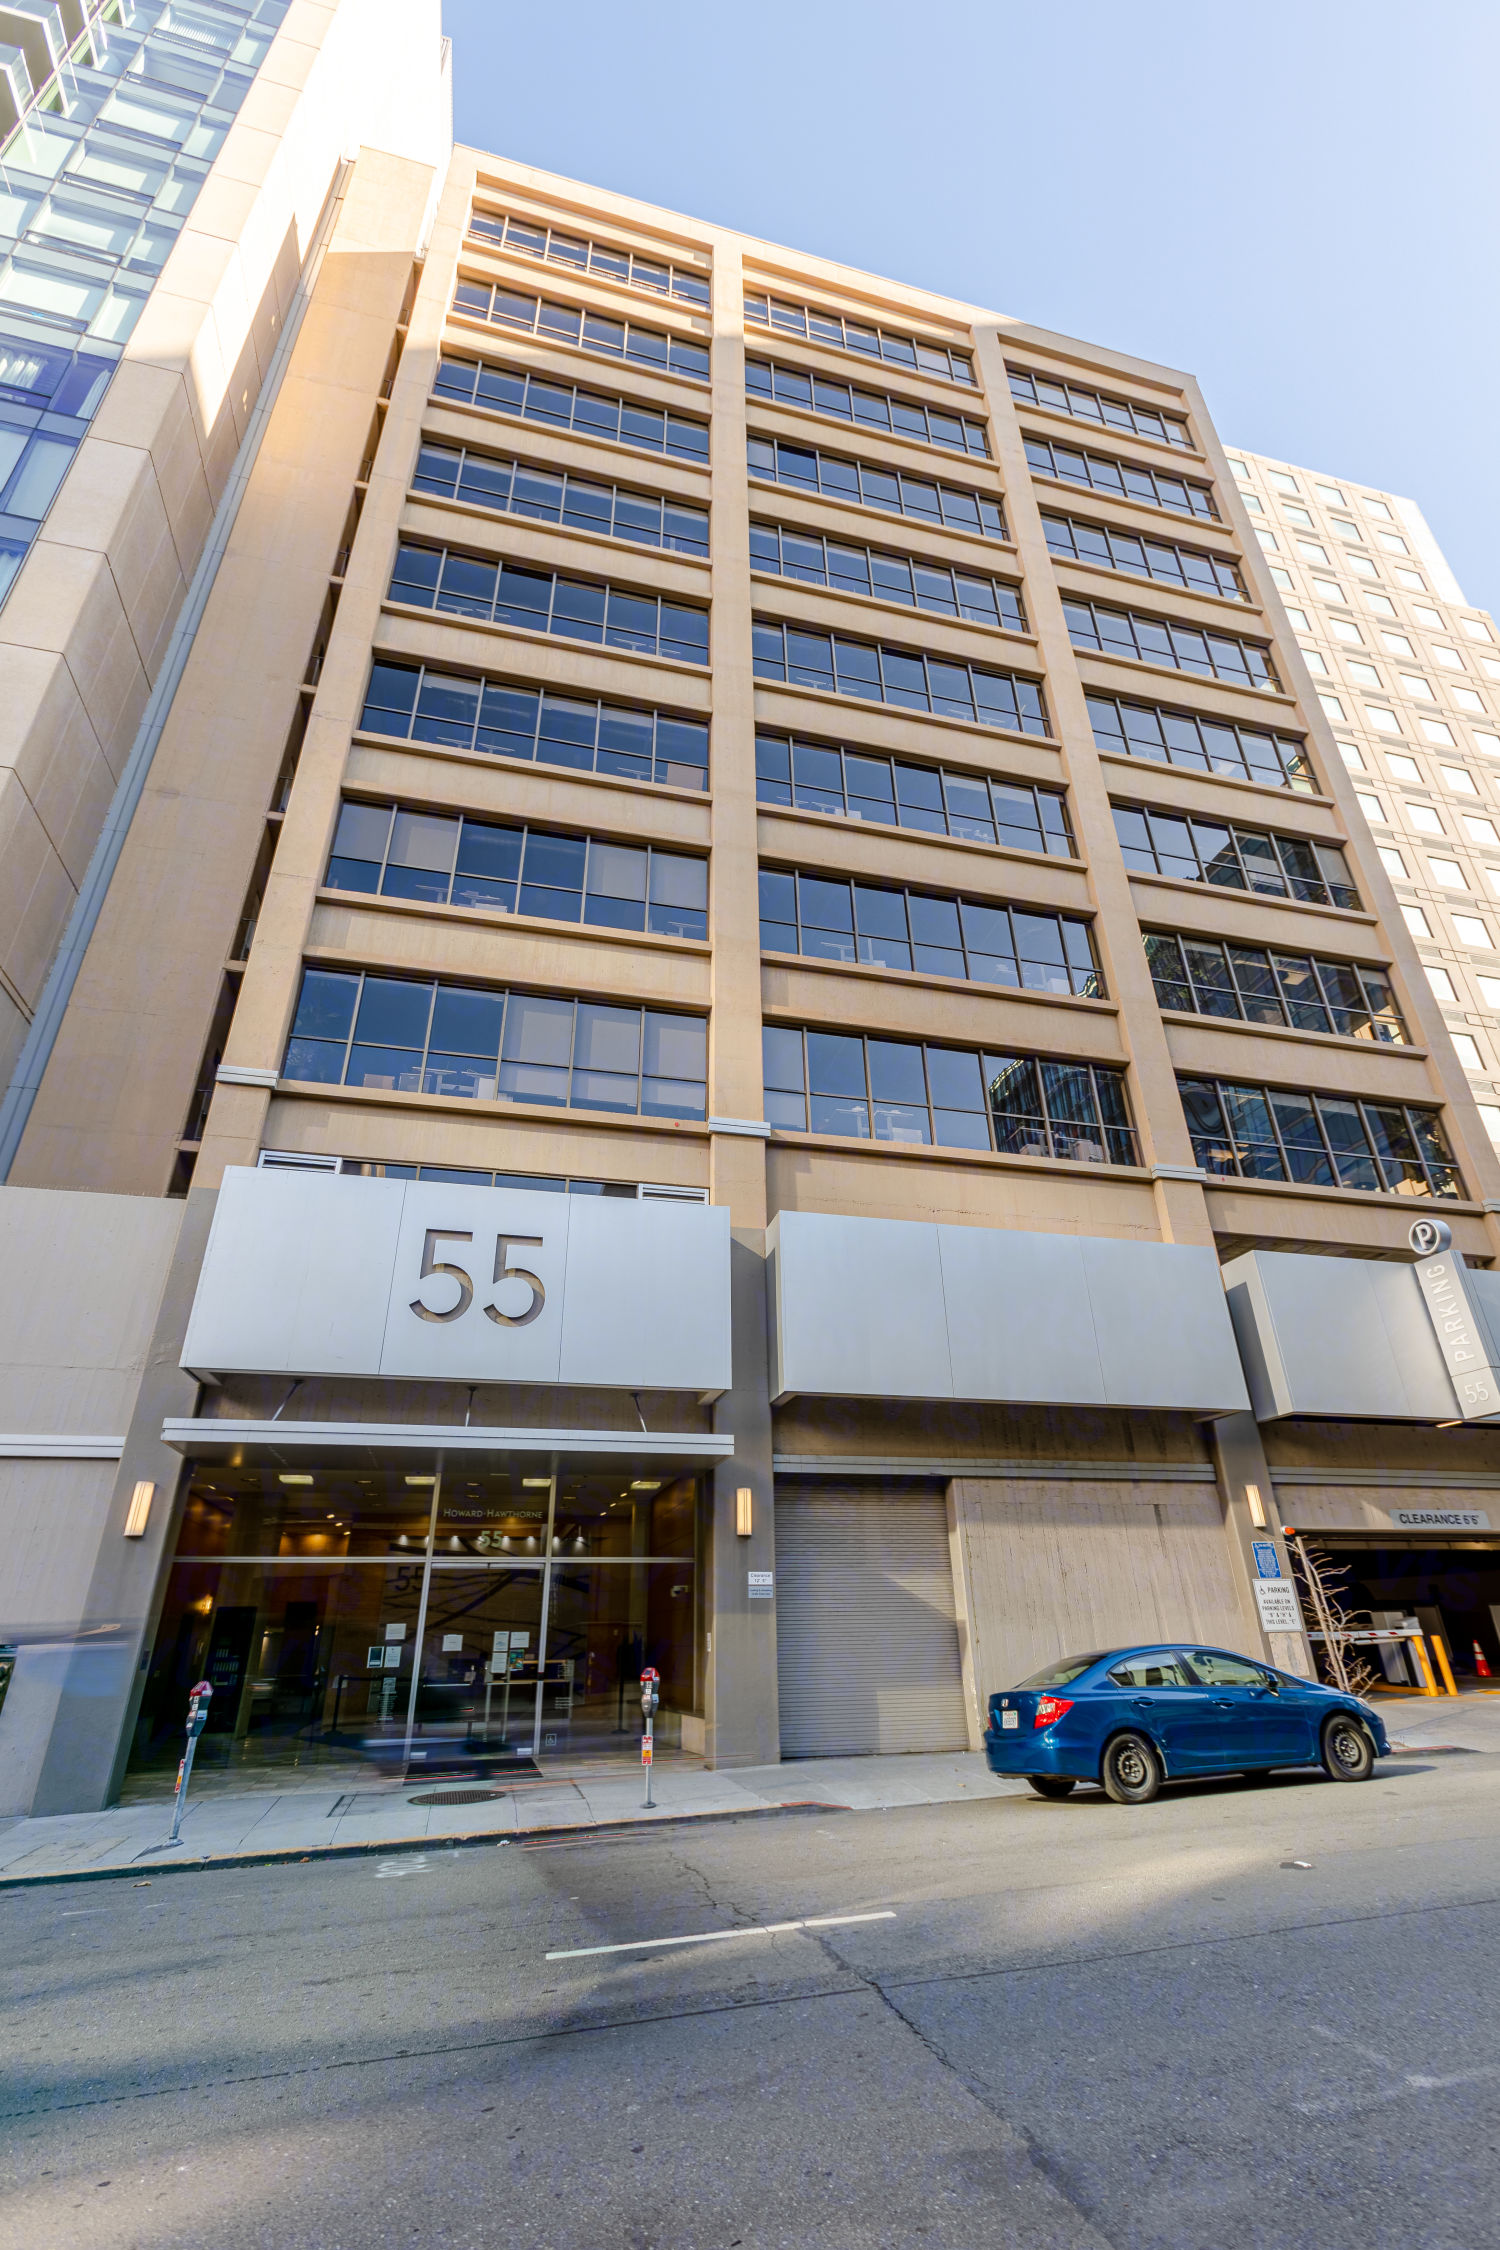 55 Hawthorne Street, San Francisco, CA Office Space for Rent | VTS